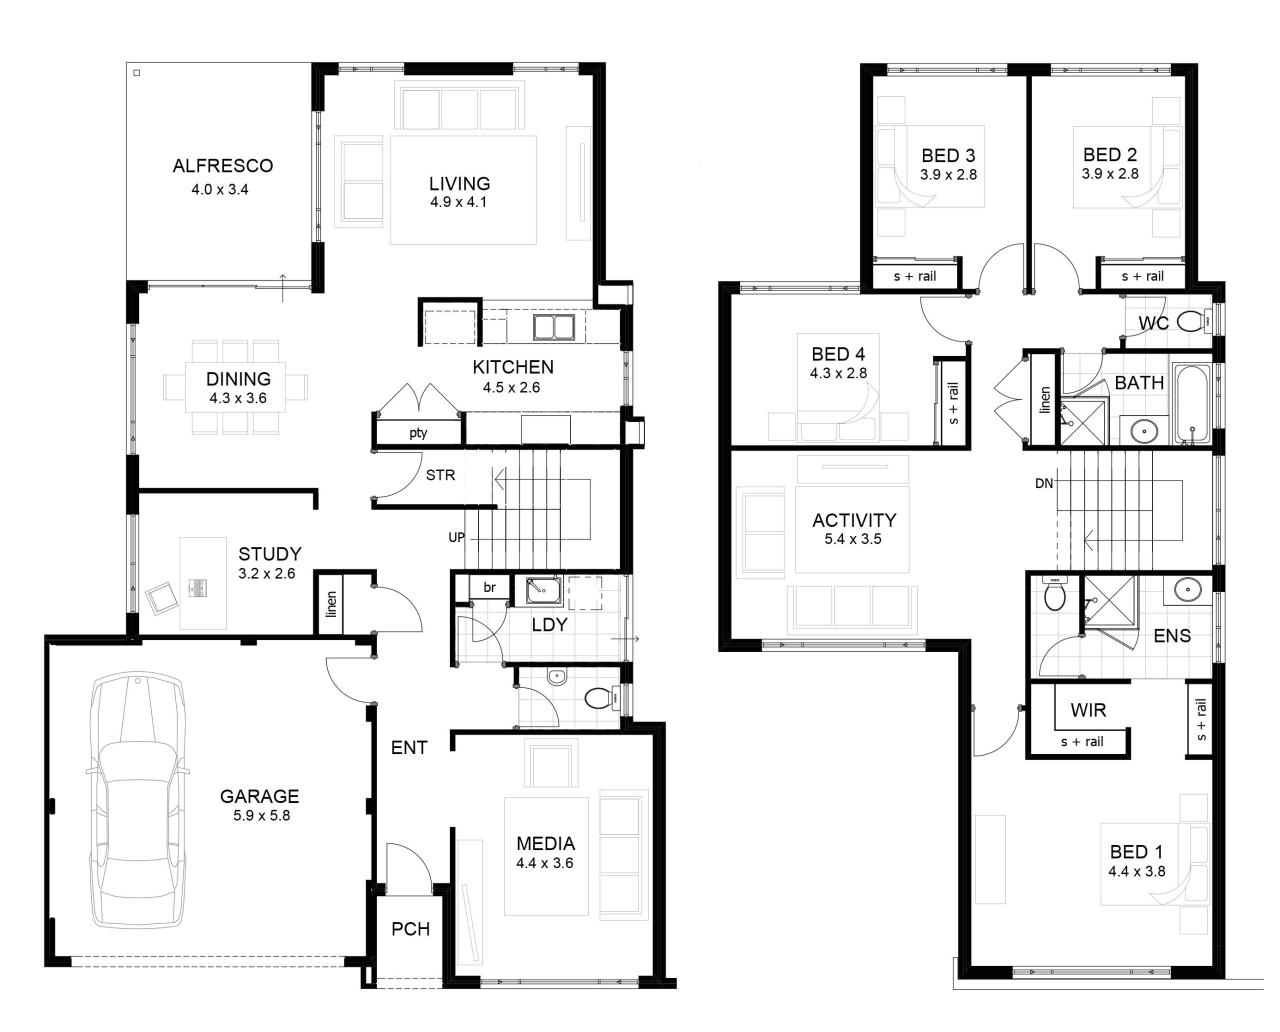 two storey house floor plan homes floor plans Two storey house plans